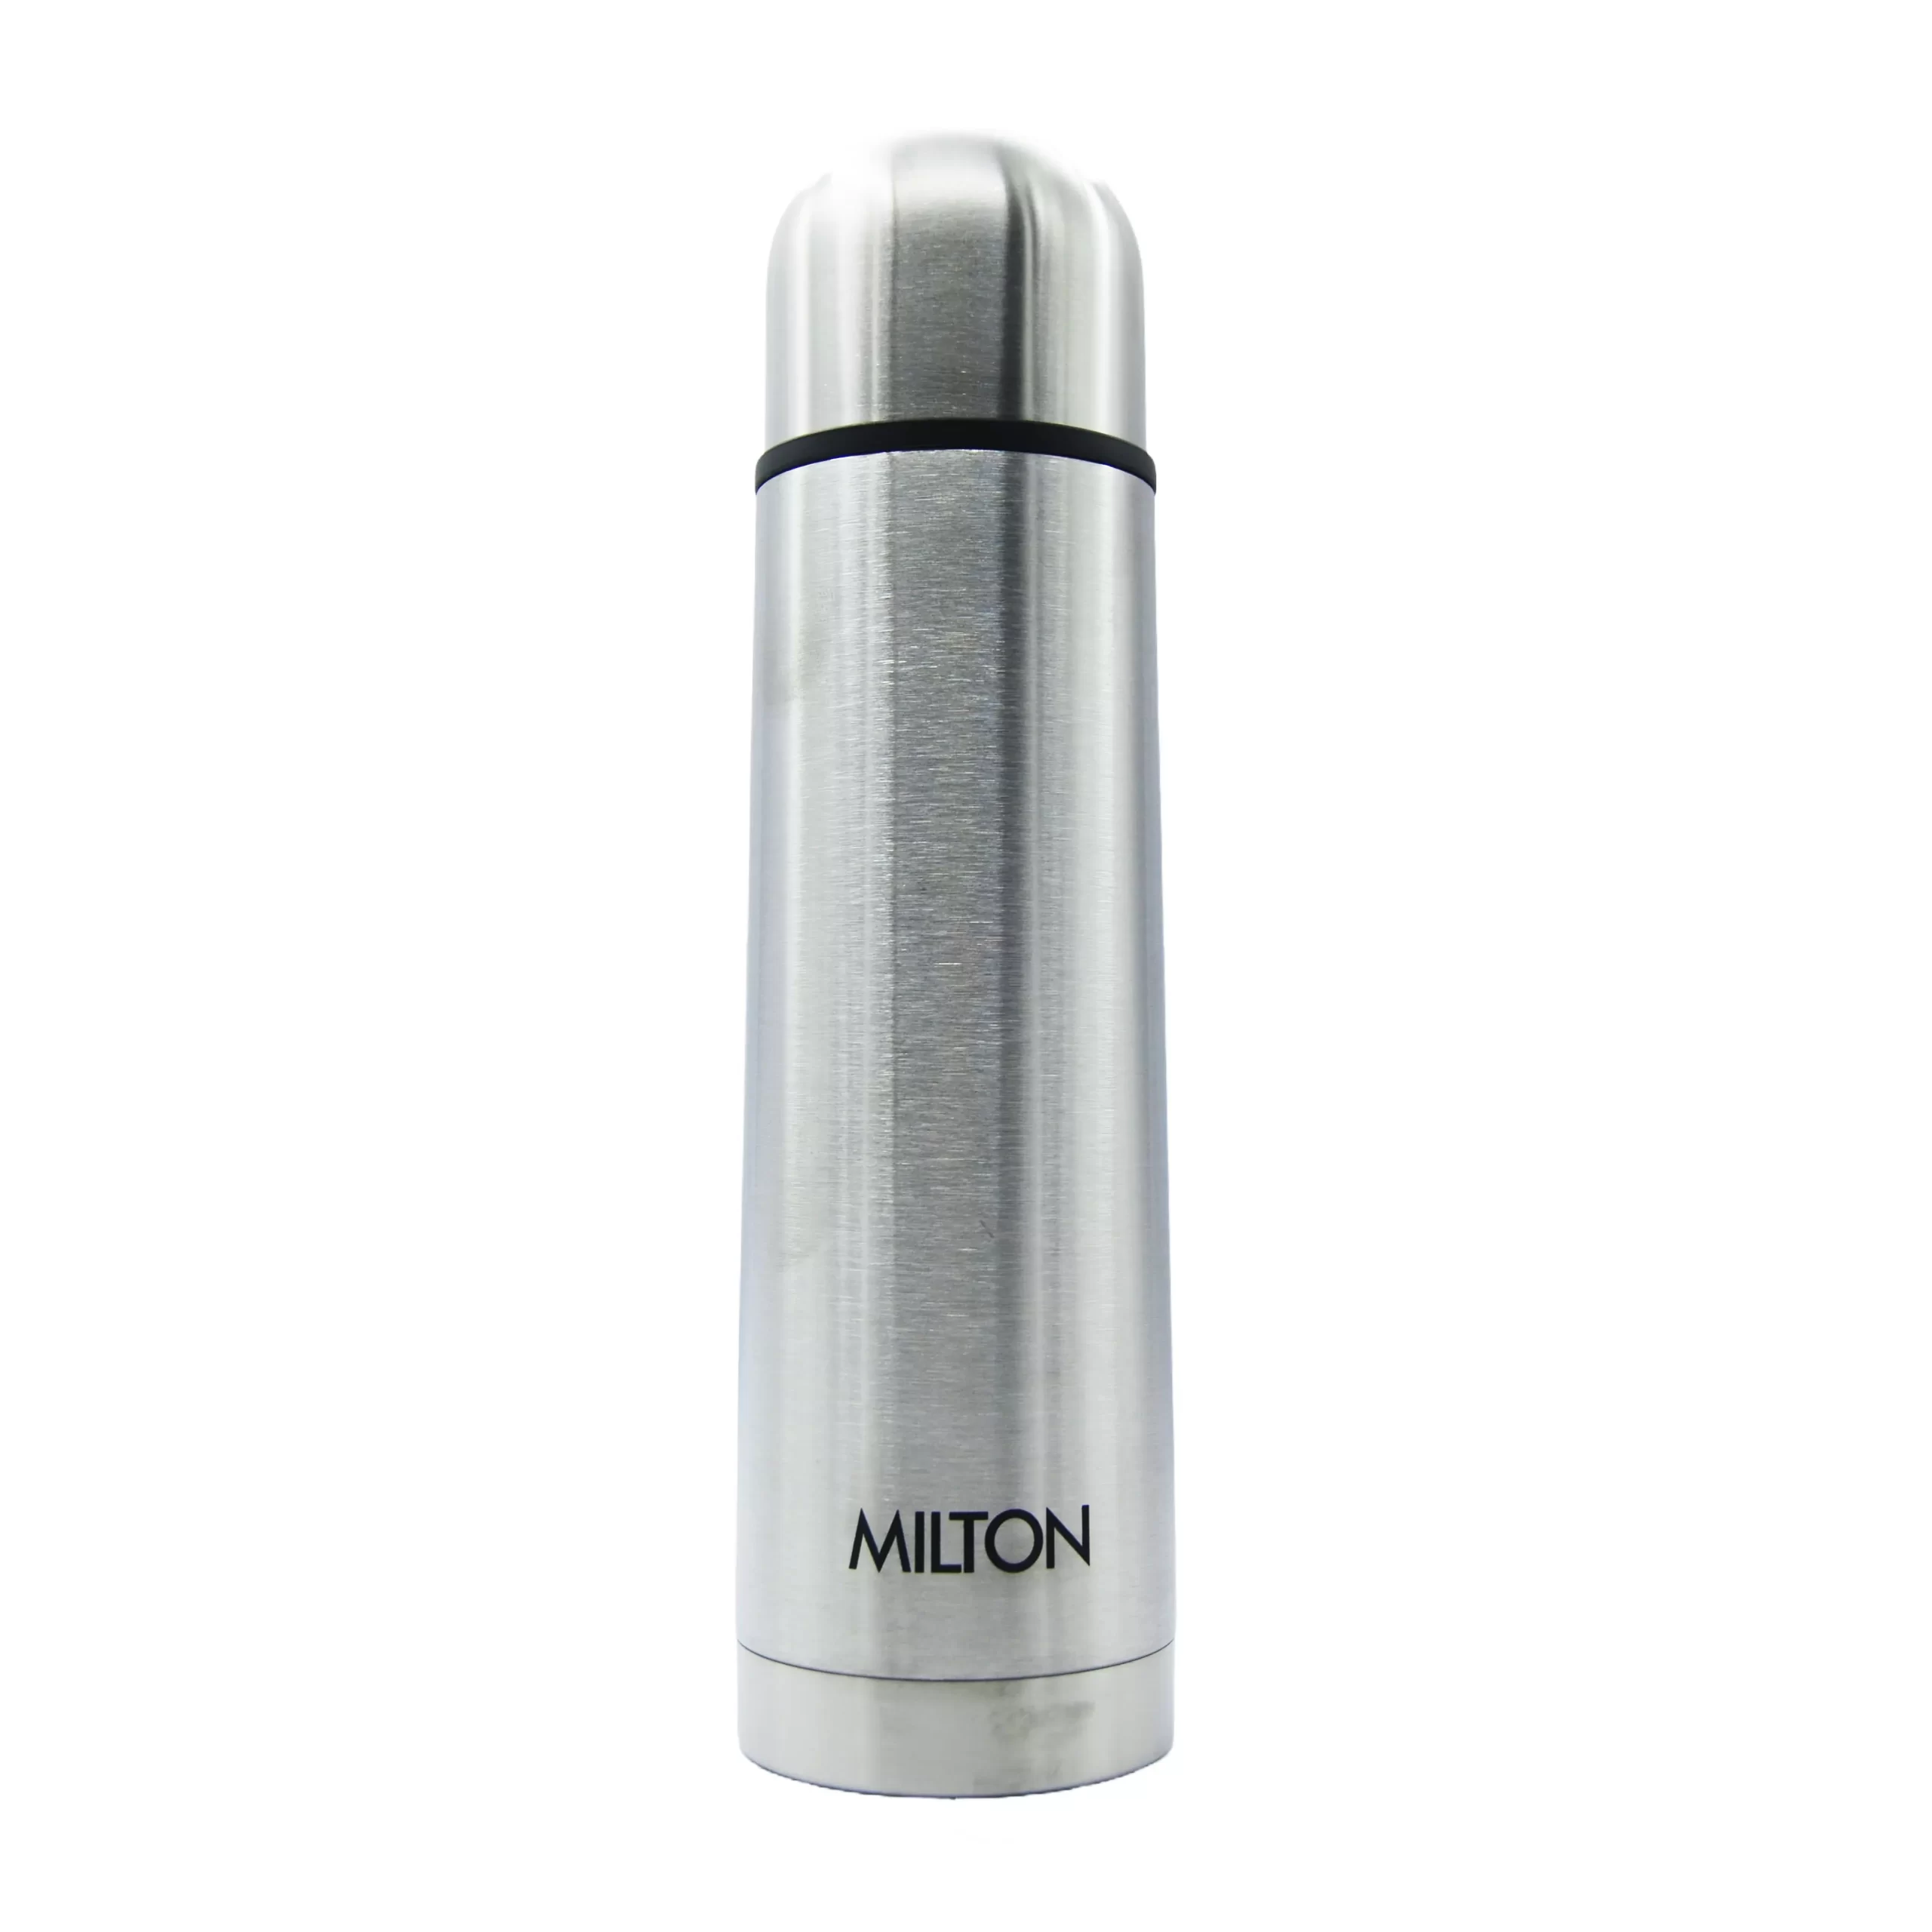 https://leletoday.in/wp-content/uploads/2022/12/Milton-Thermosteel-500-Flip-Lid-Silver-Vacuum-Insulated-Bottle-24Hours-Hot-Cold-Bottle-with-Bag-500ml-scaled.webp